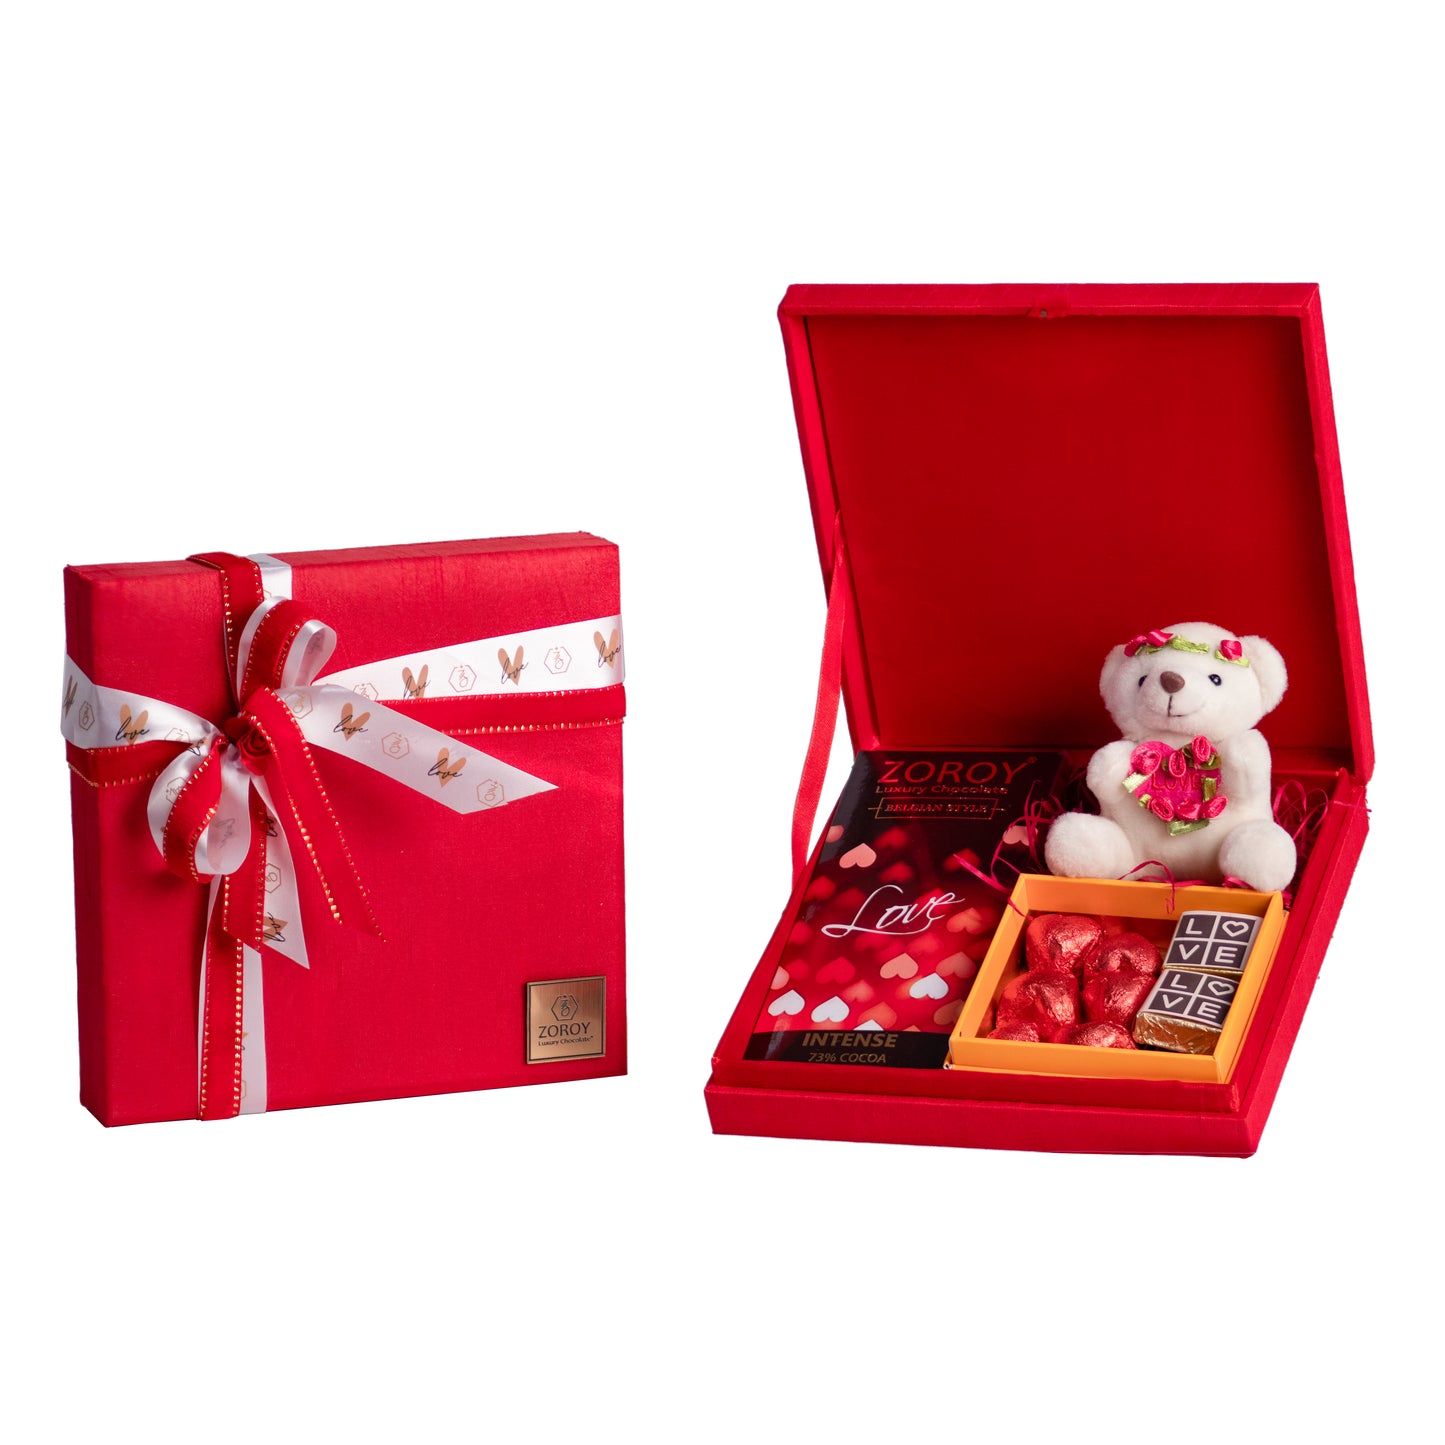 ZOROY LUXURY CHOCOLATE Red Silk Box with Valentines special chocolates and teddy bear For Girlfriend | Boyfriend Anniversary Gifts For Wife | Husband | Love Chocolates | Chocolate Hamper